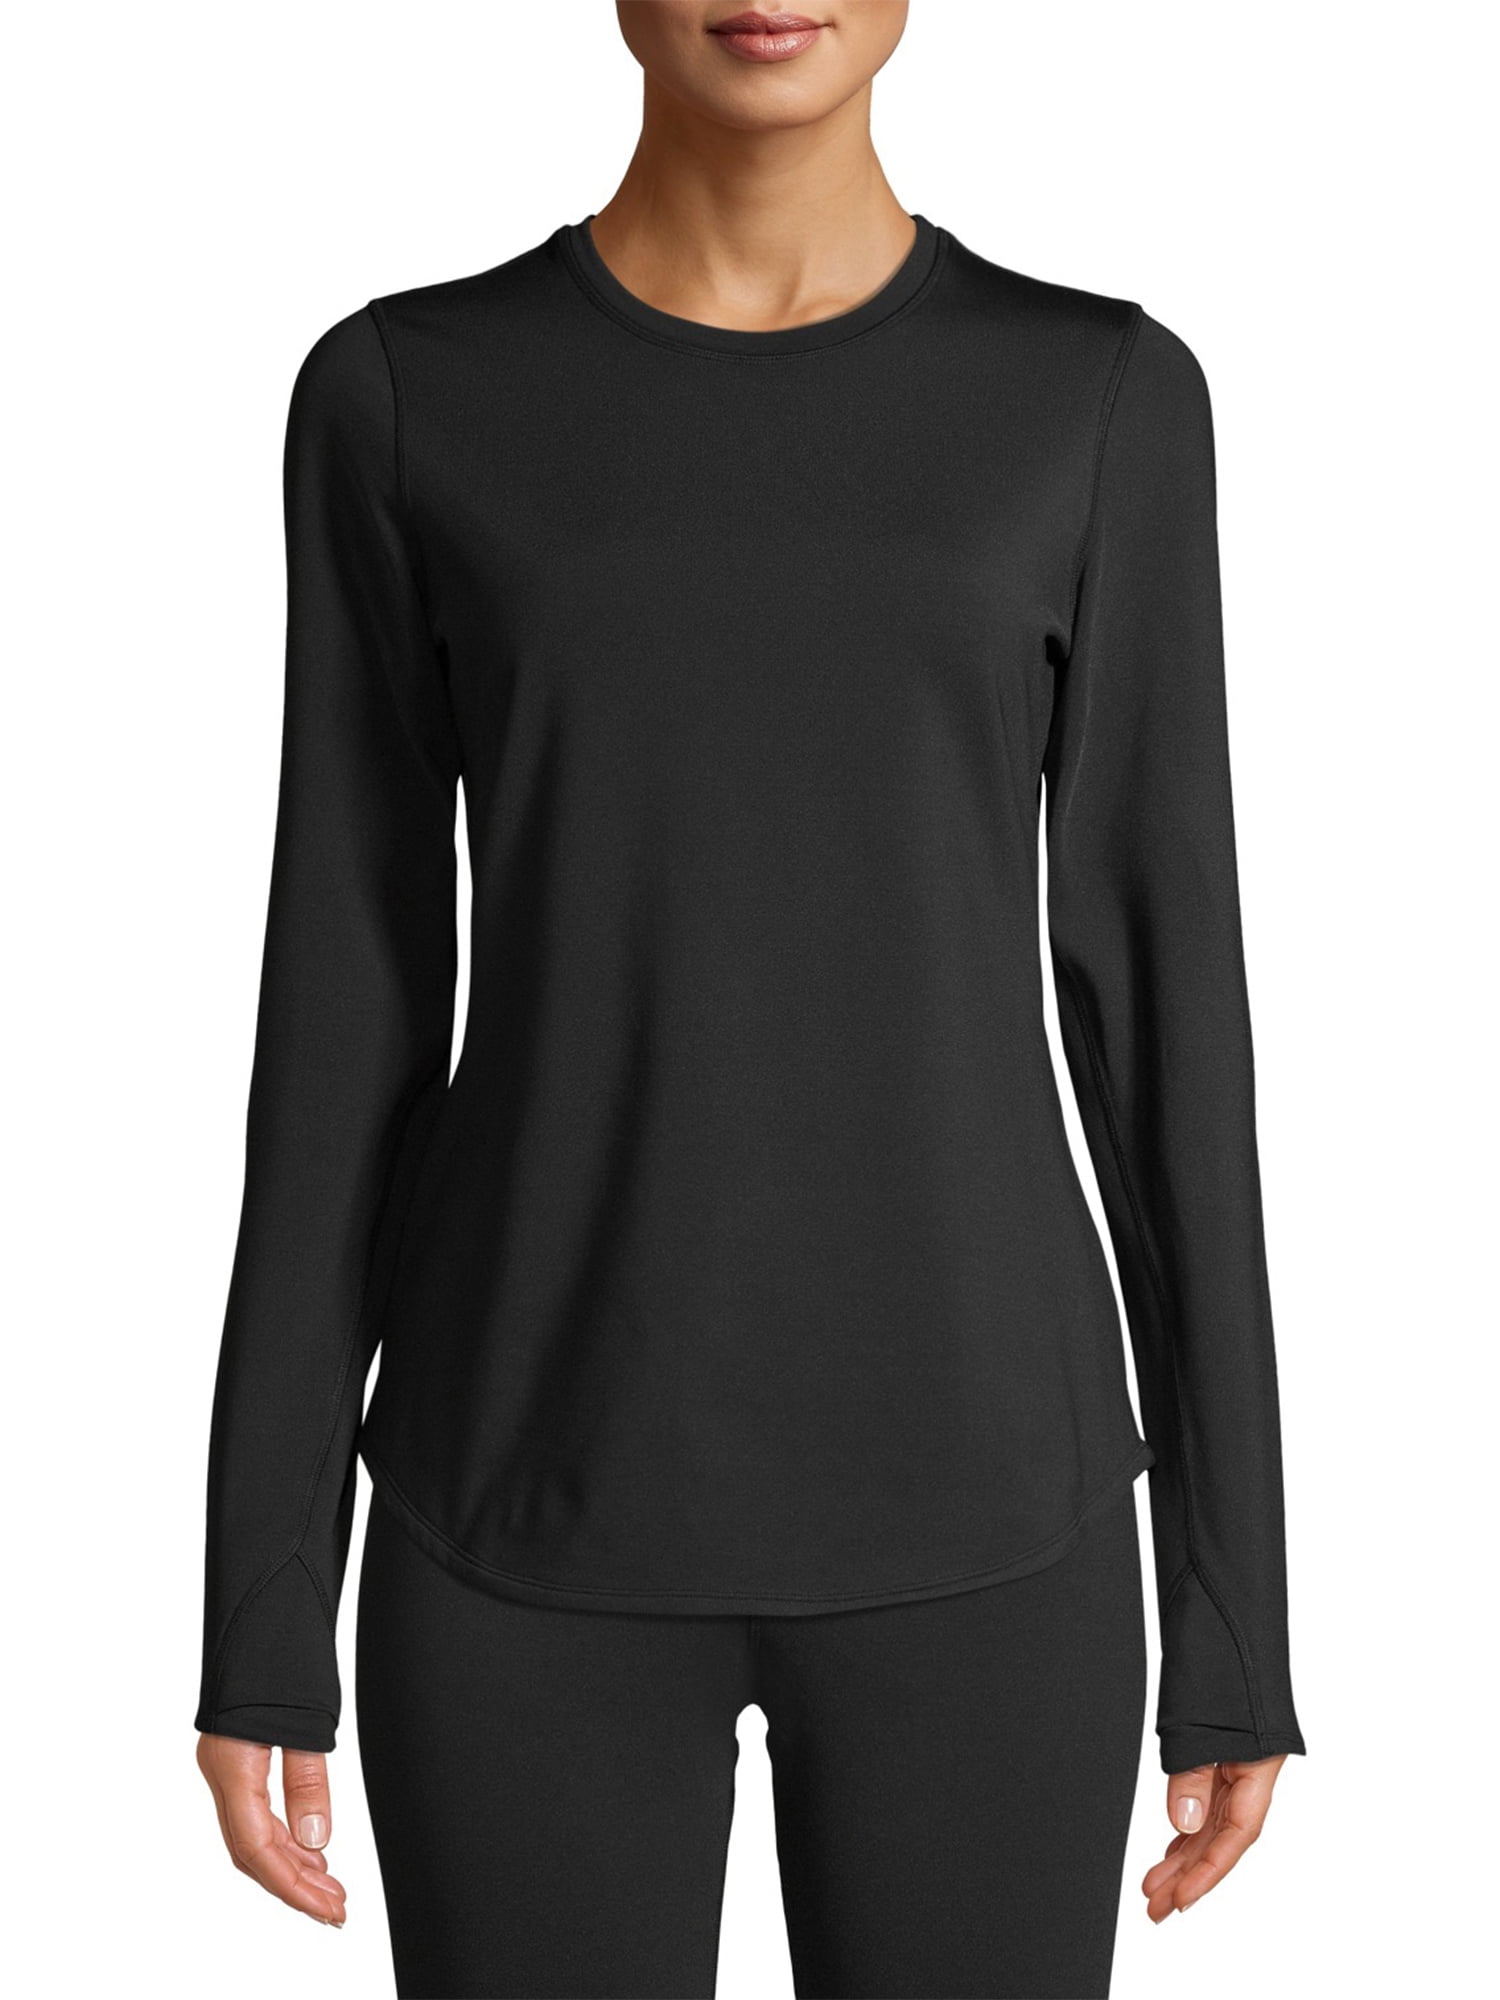 Cuddl Duds ClimateRight Women's Long Sleeve Crew Base Layer Top in Black 